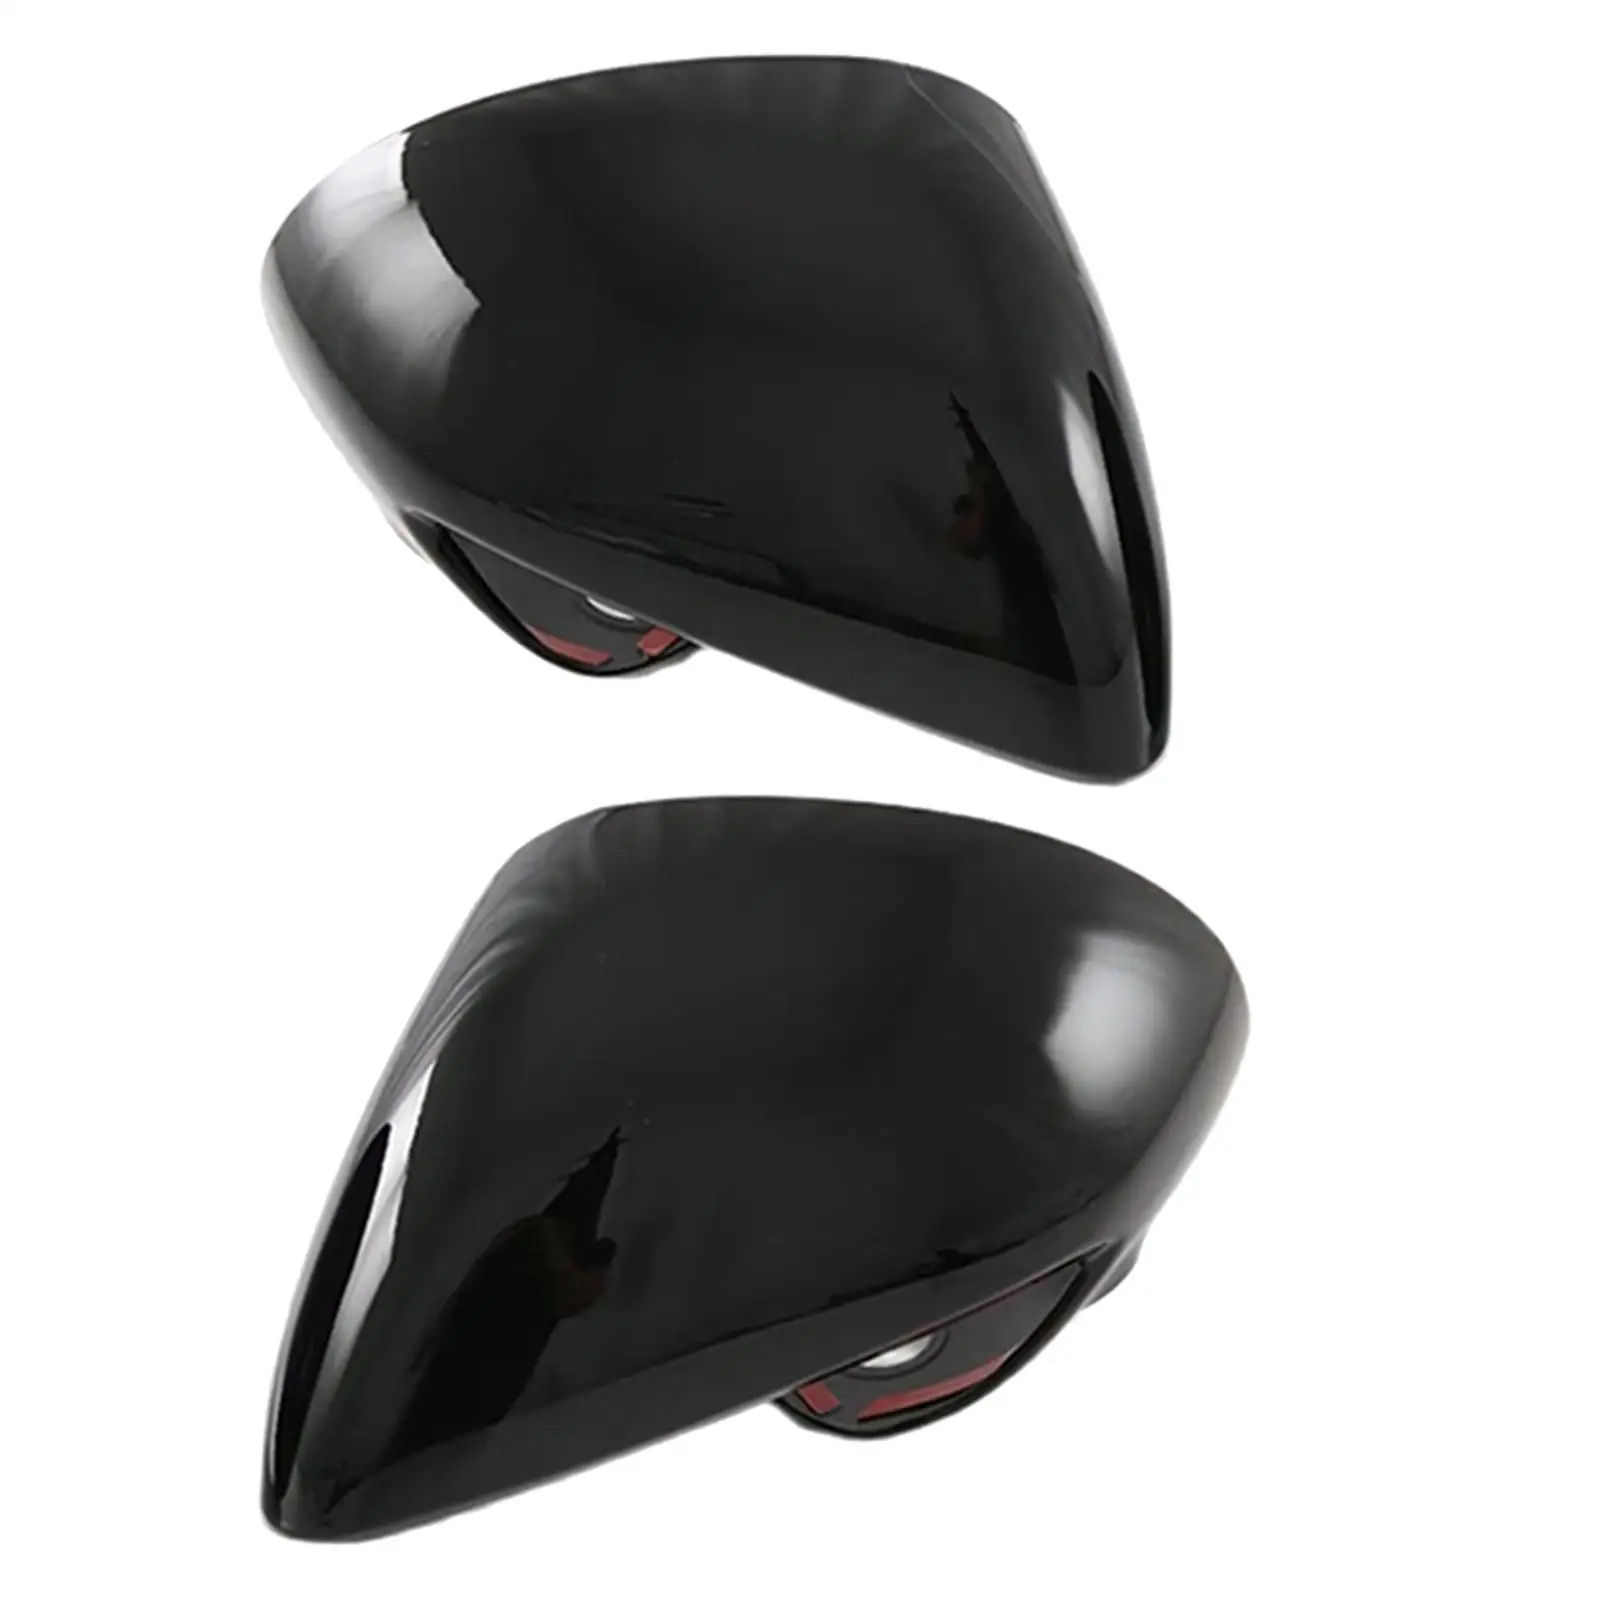 2Pcs Car Side Rear View Mirror Guard Cover Caps Trims Durable Replace for Byd Dolphin Atto 2 ea1 2022 2023 Auto Accessories